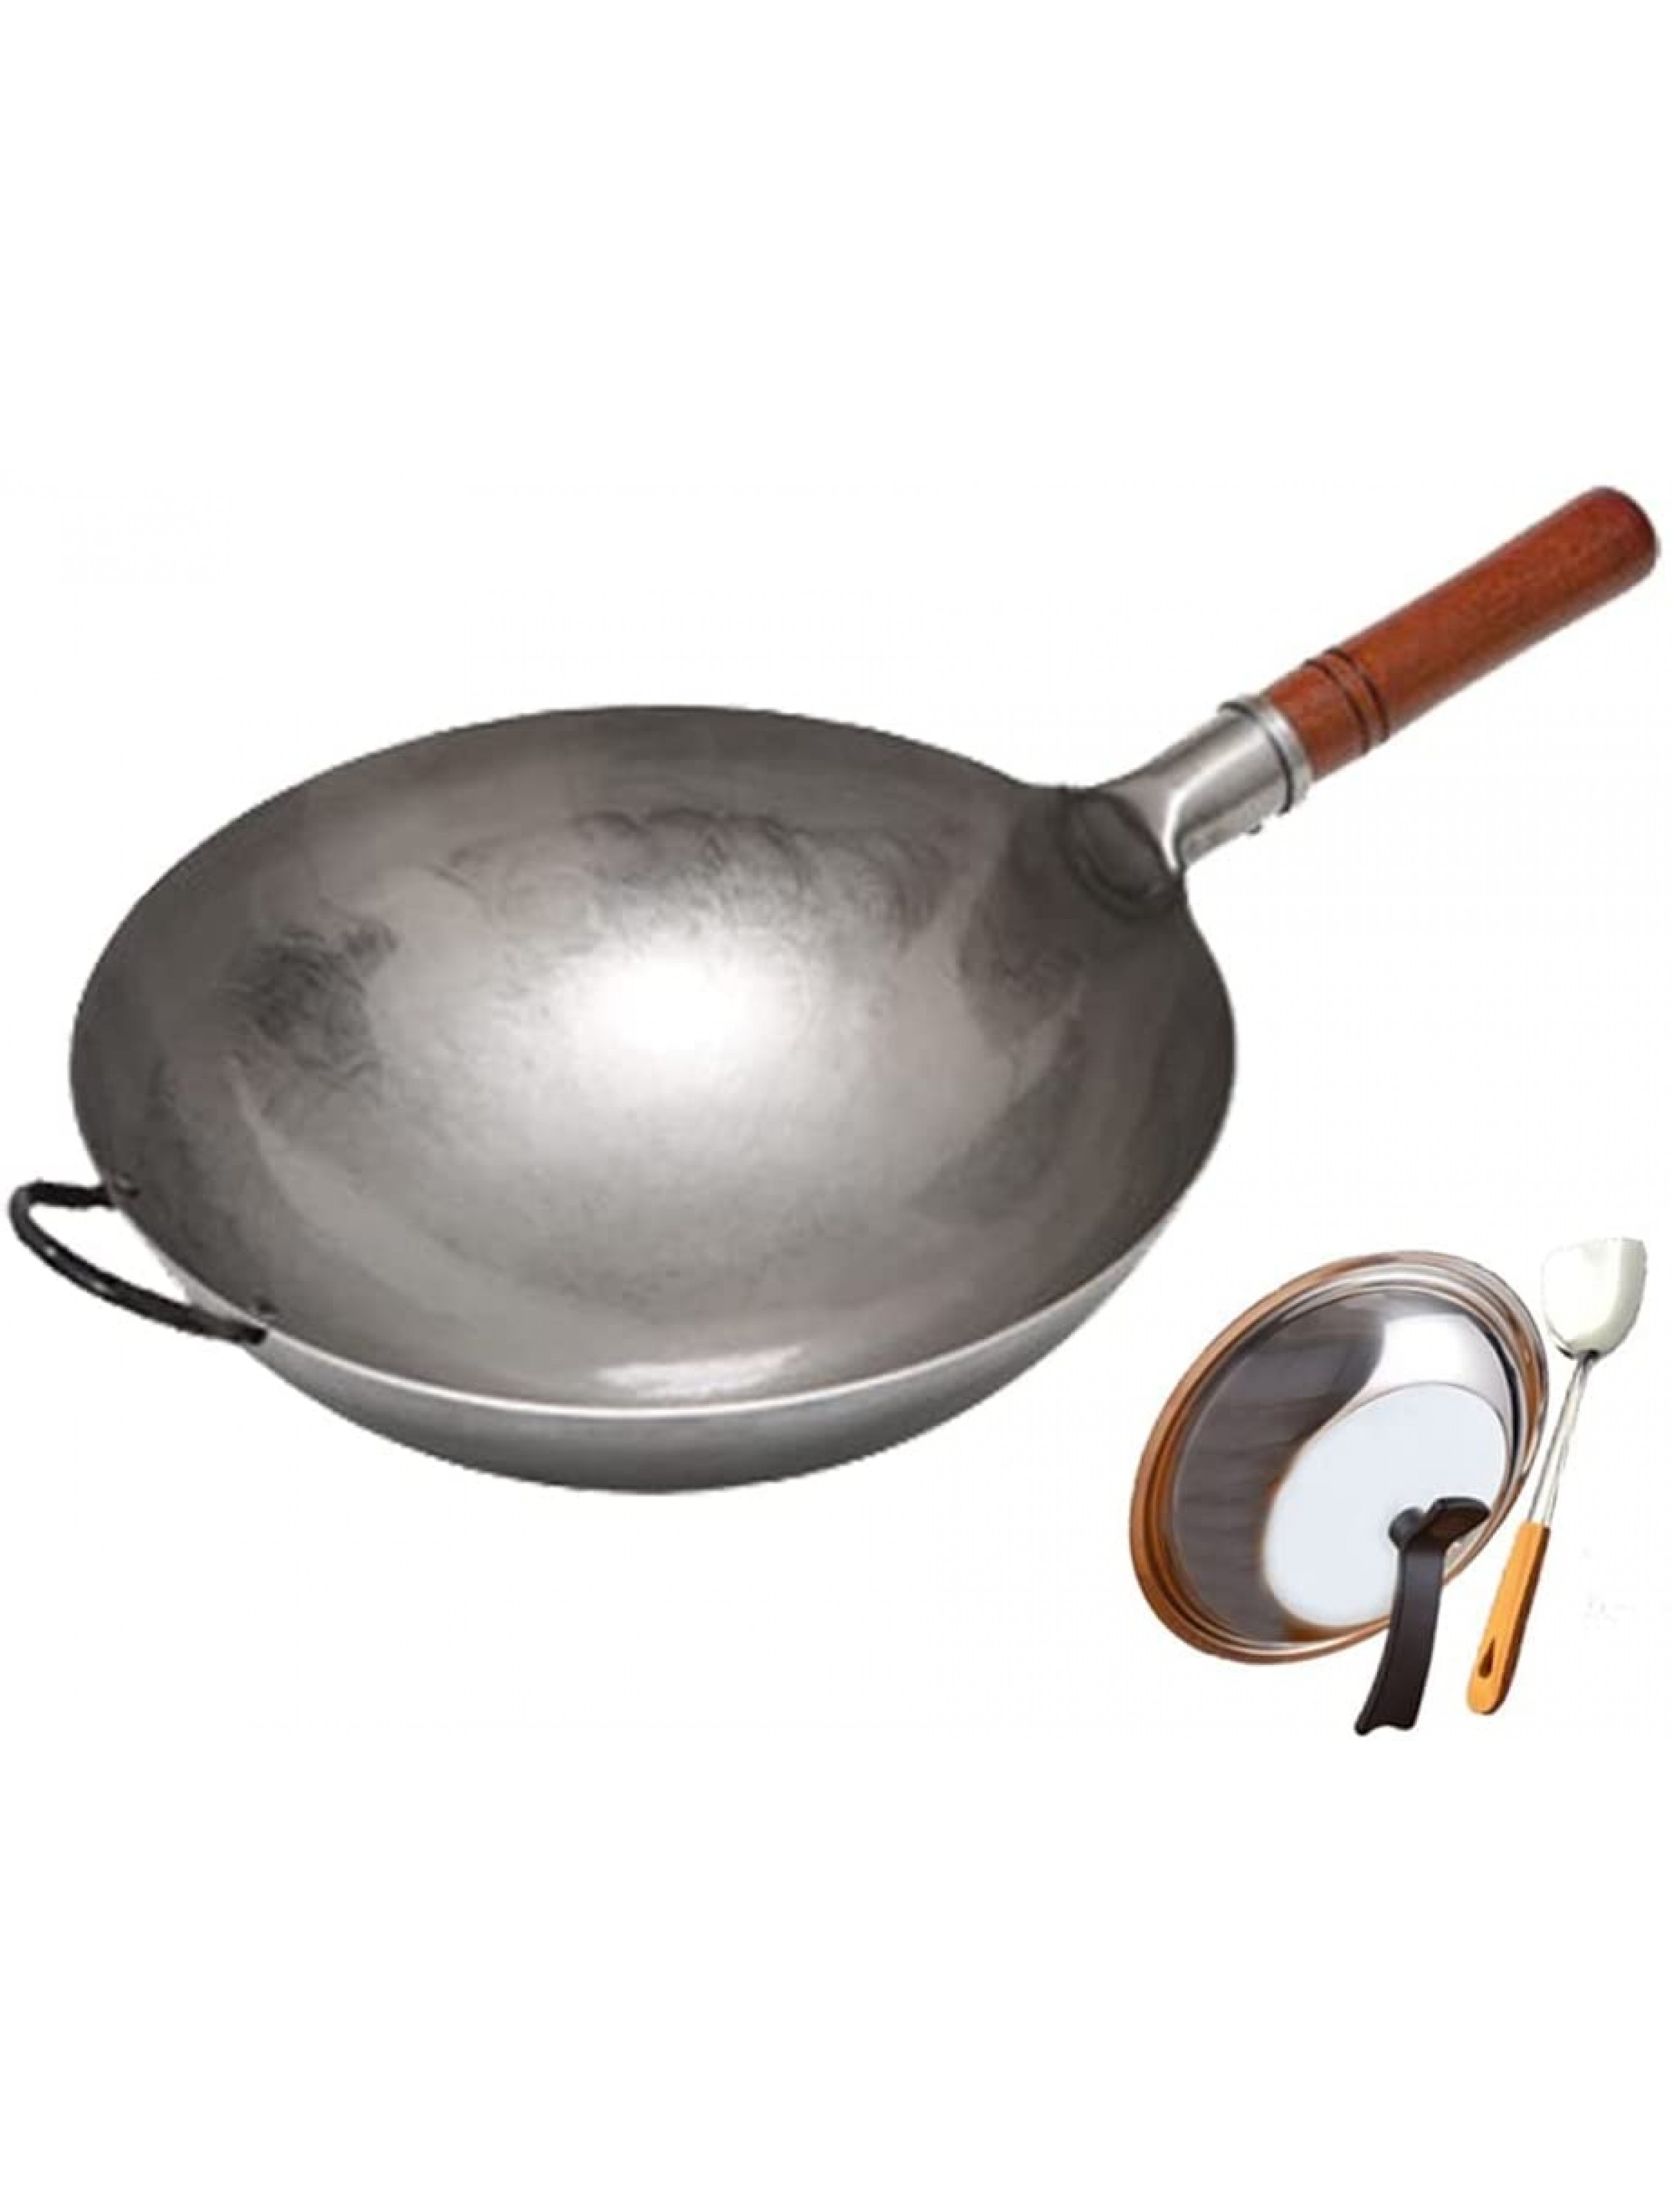 YAYADU-Storage Basket Iron Wok with Helper Handle Traditional Handmade Iron Wok Non-Stick Pan Non-Coating Gas Stove Cookware for Gas Induction Cooktop Color : Silver-B Size : 36cm - B37YJXY42